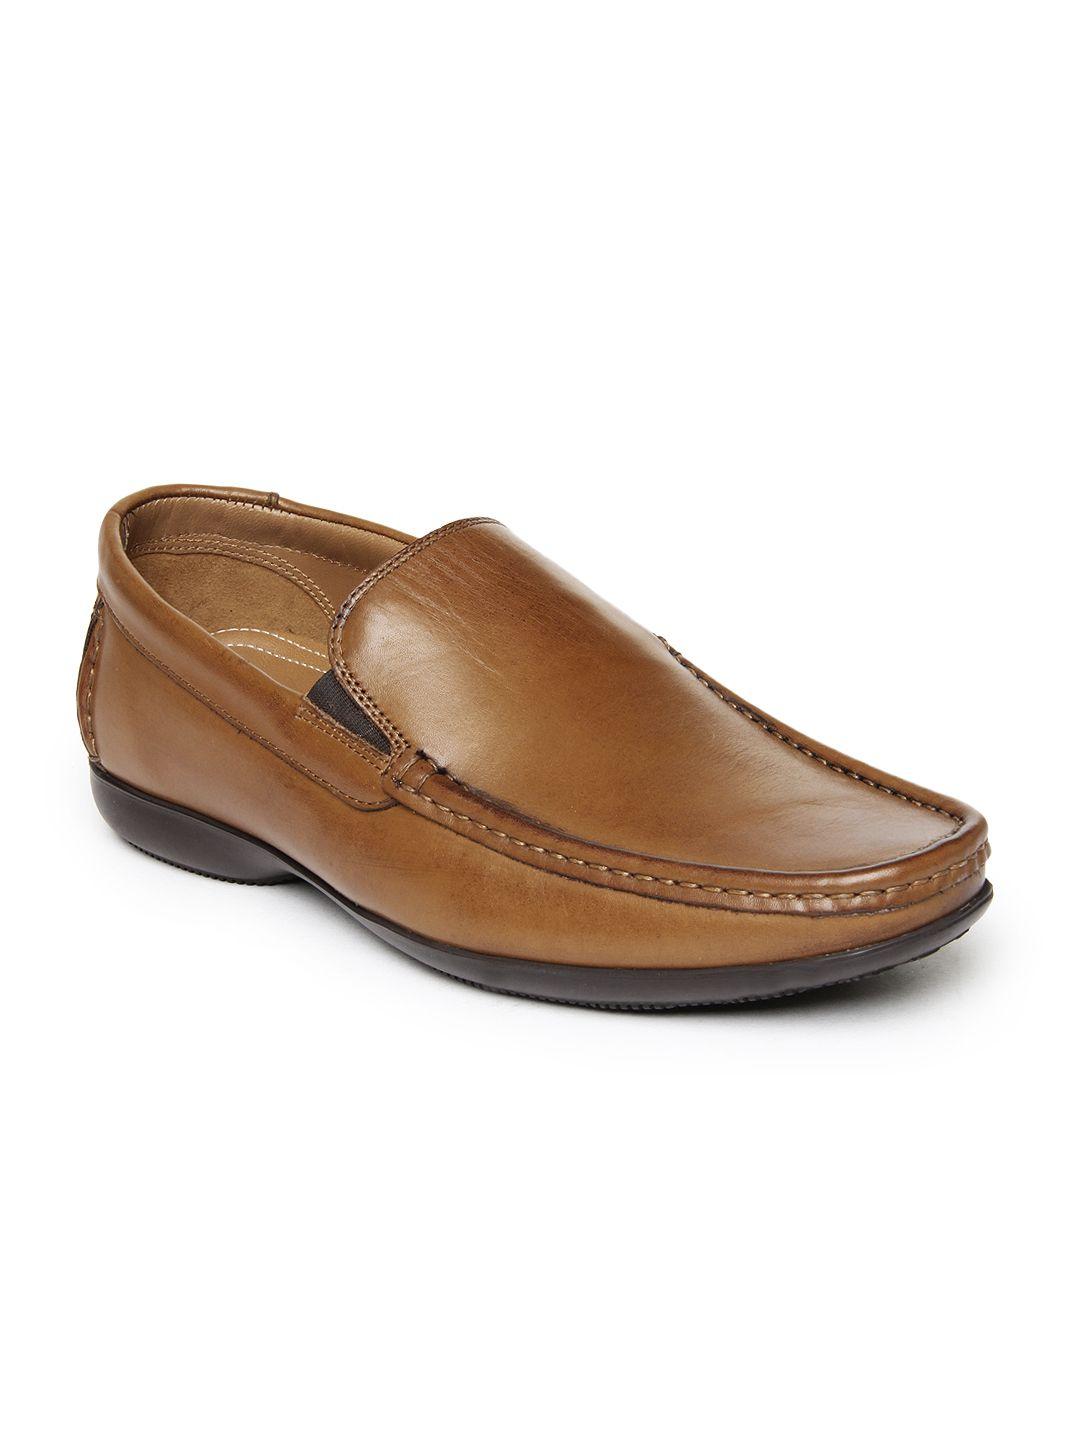 clarks men brown leather loafers